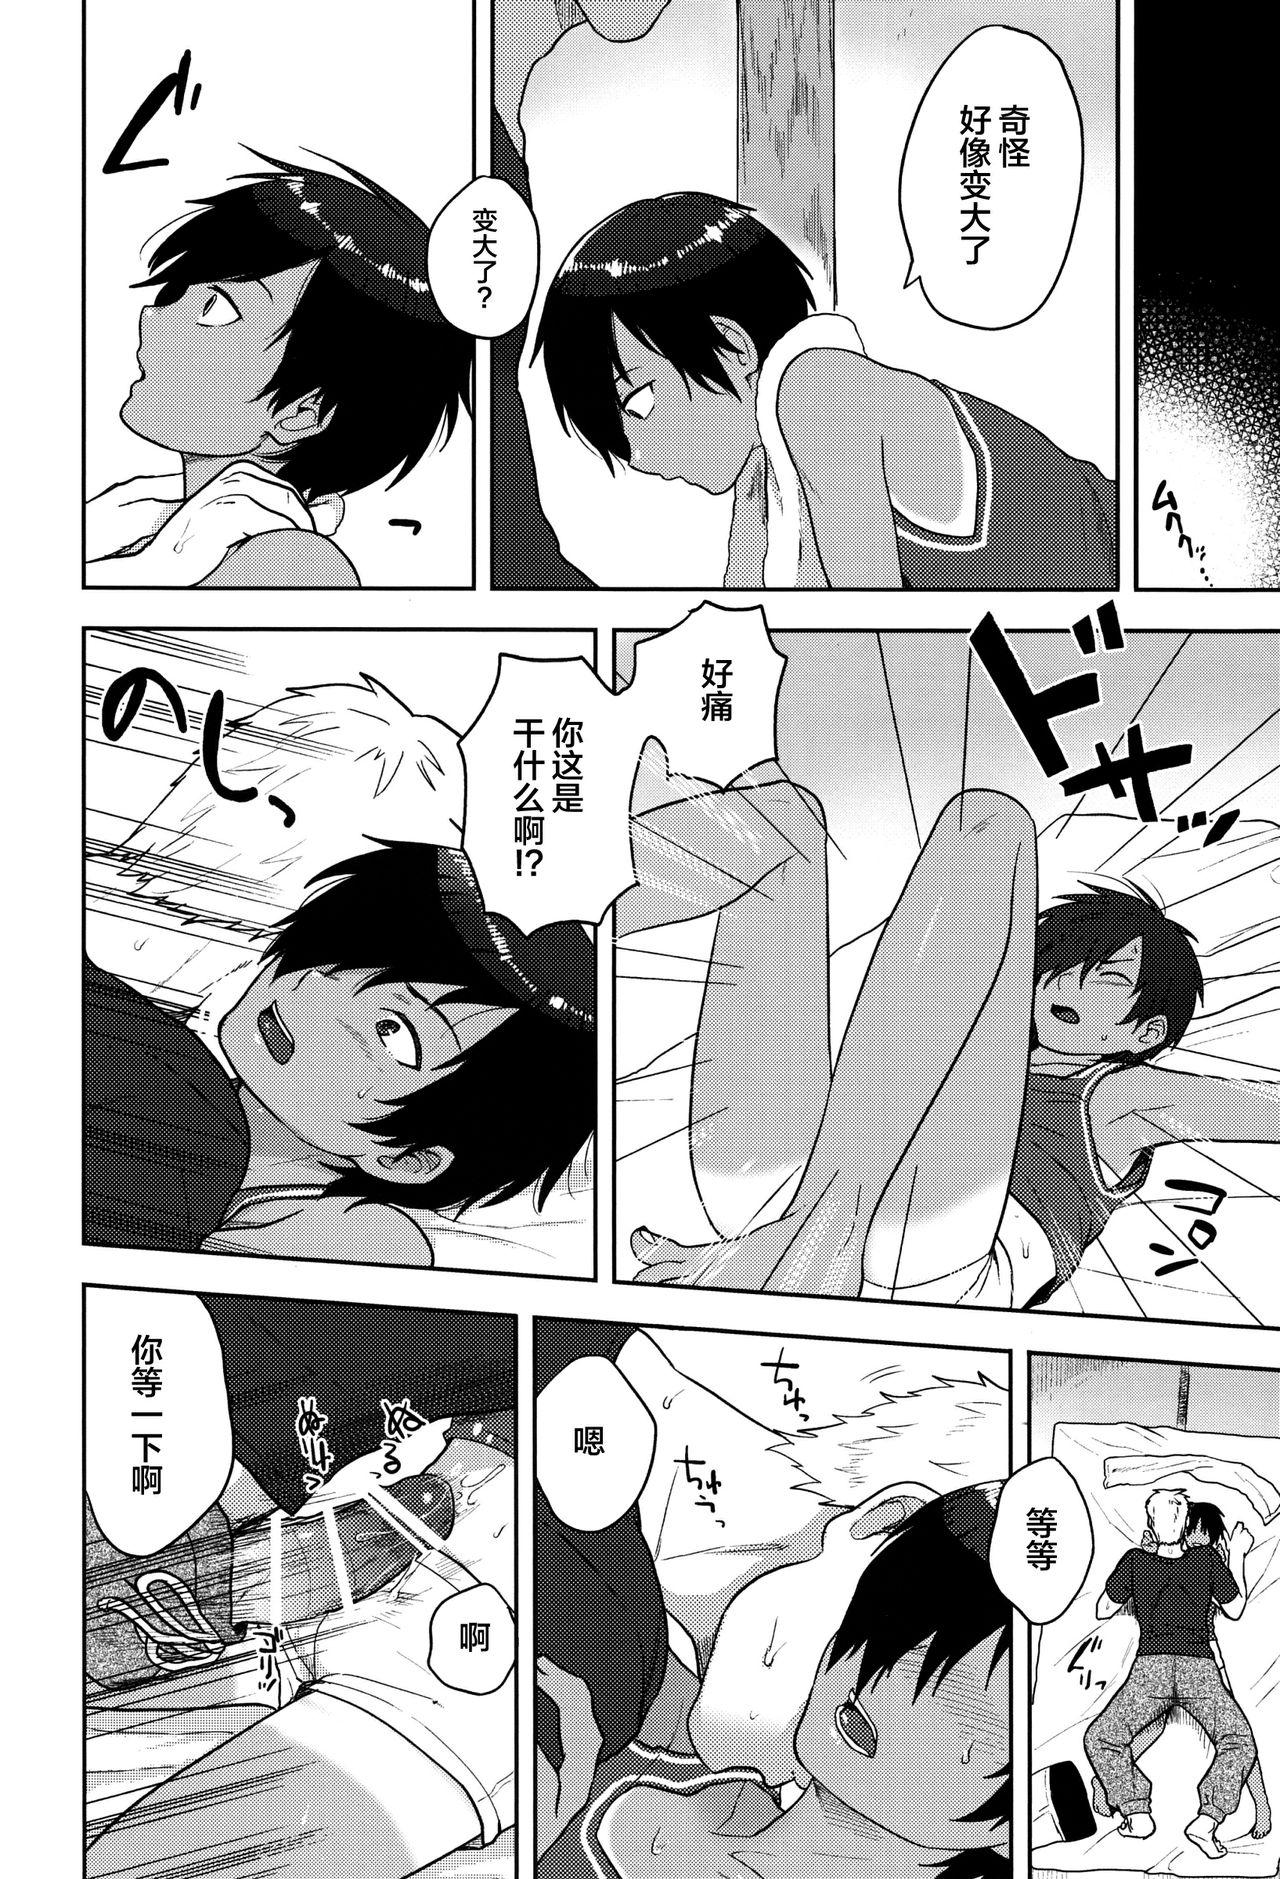 Mediumtits DKY - Summer wars Street - Page 9